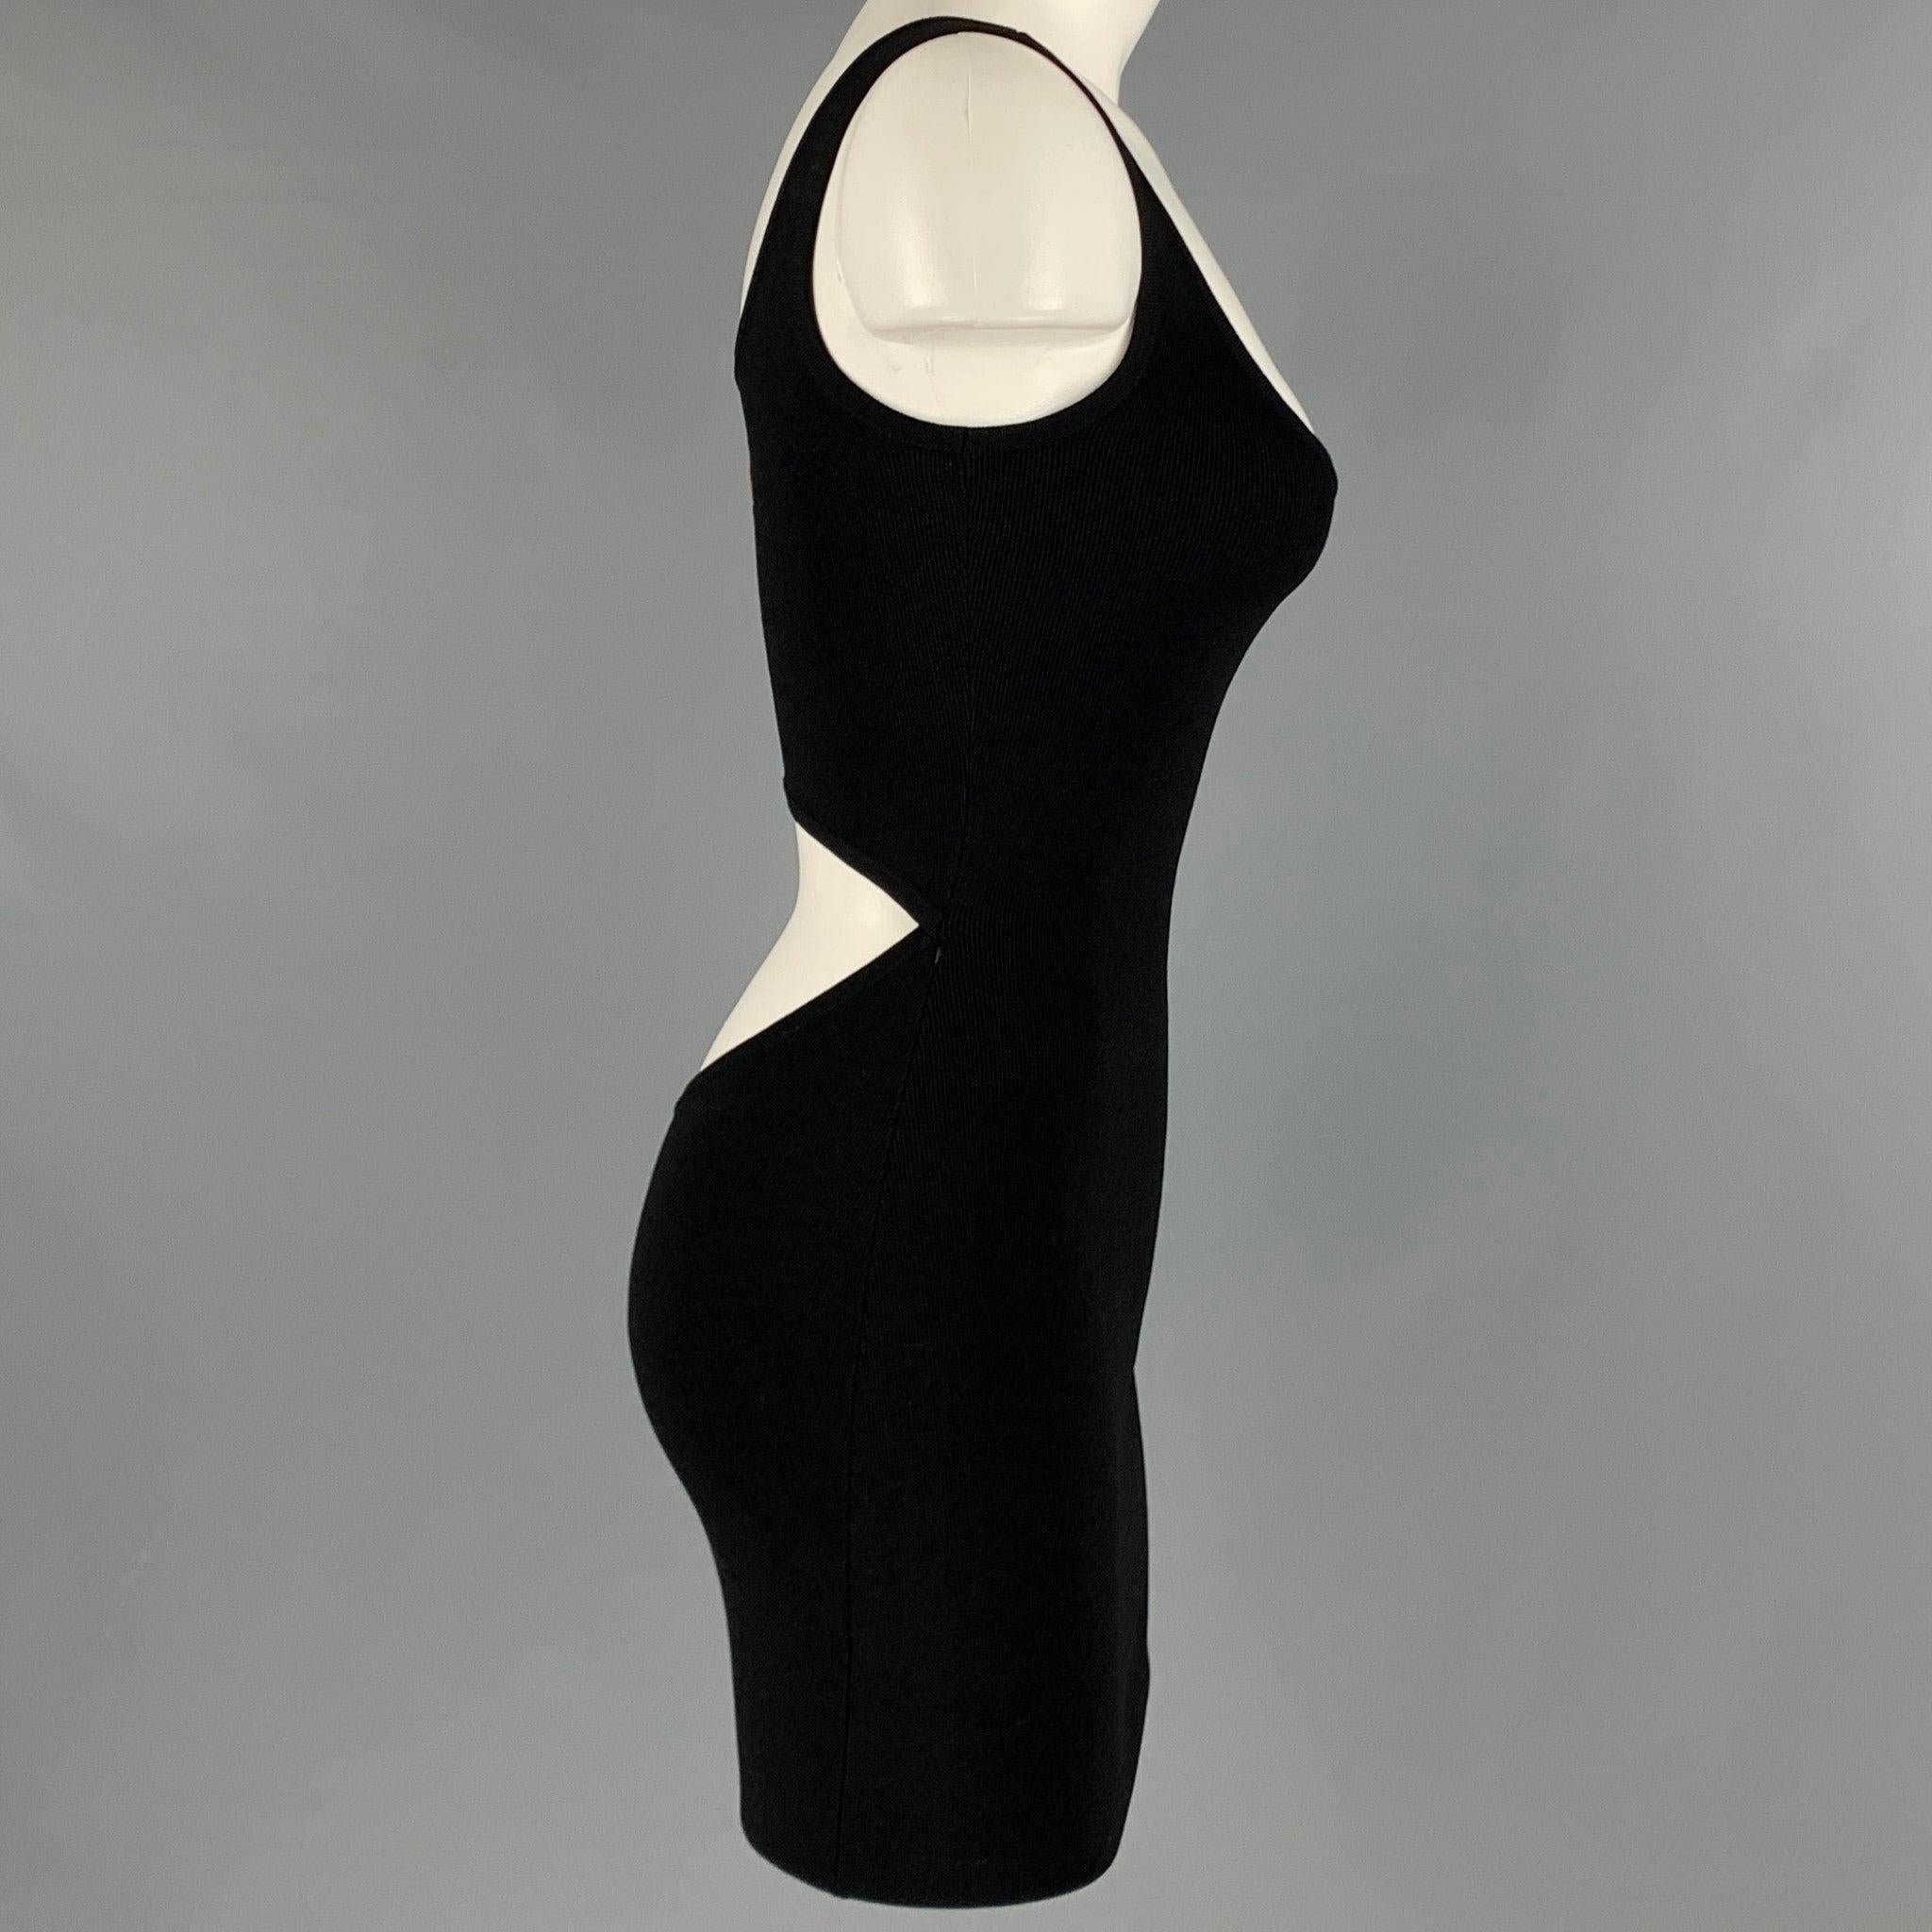 CALVIN KLEIN dress
in a black jersey material featuring a stretchy bodycon style, open back, and above knee length.Very Good Pre-Owned Condition. Minor hole on right side. Care and size tags have been removed. 

Marked:   size not marked.